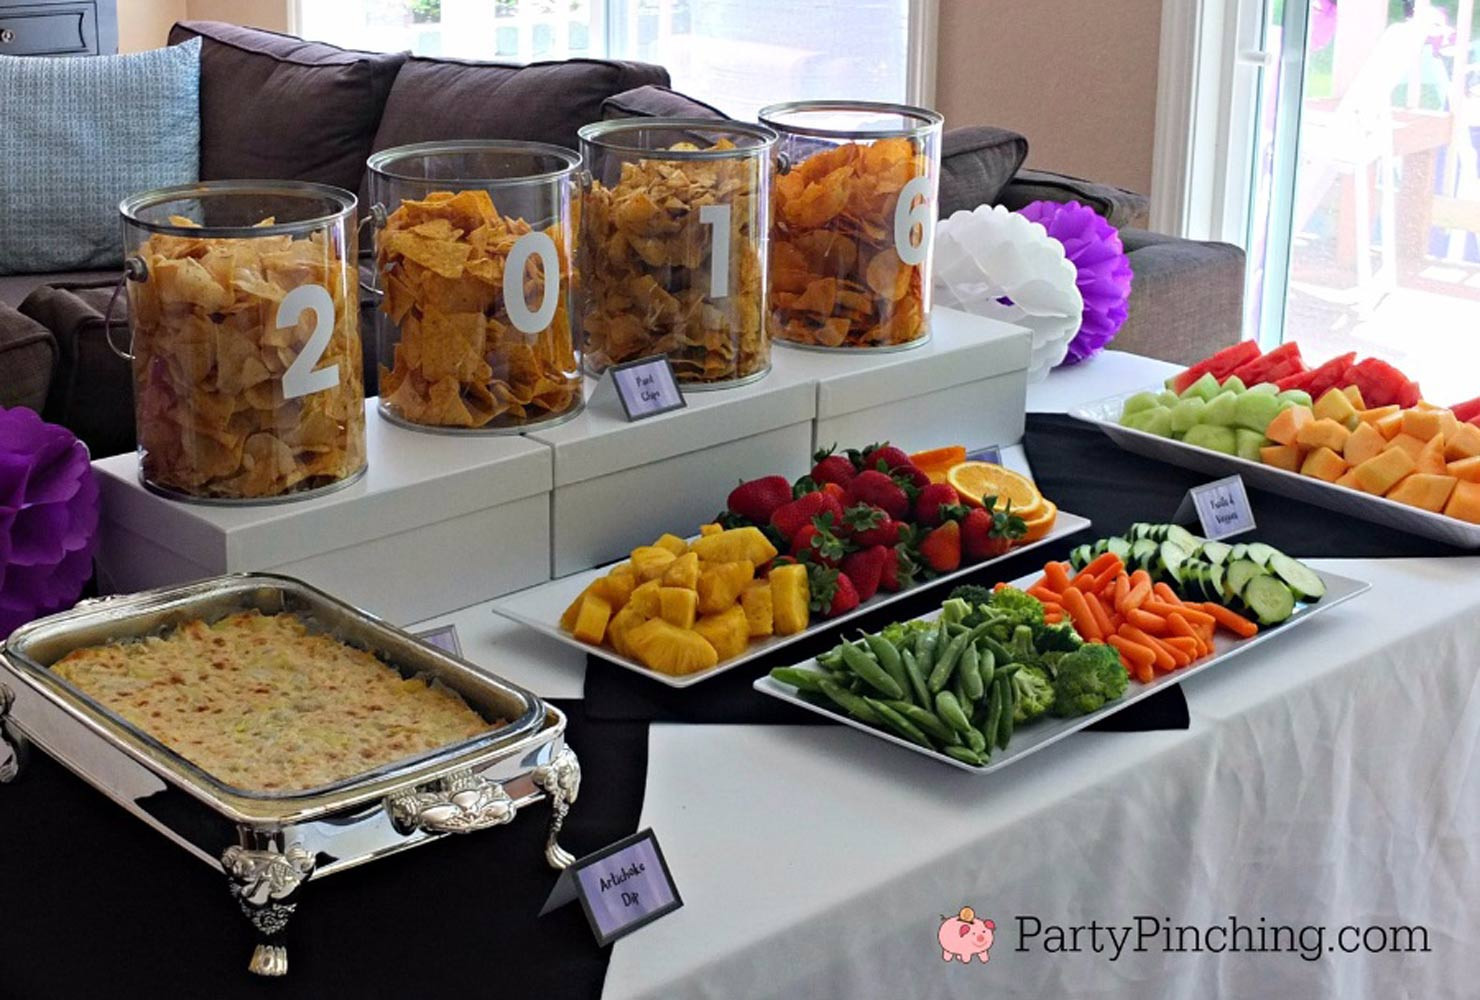 Hs Graduation Party Ideas
 90 Graduation Party Ideas for High School & College 2019